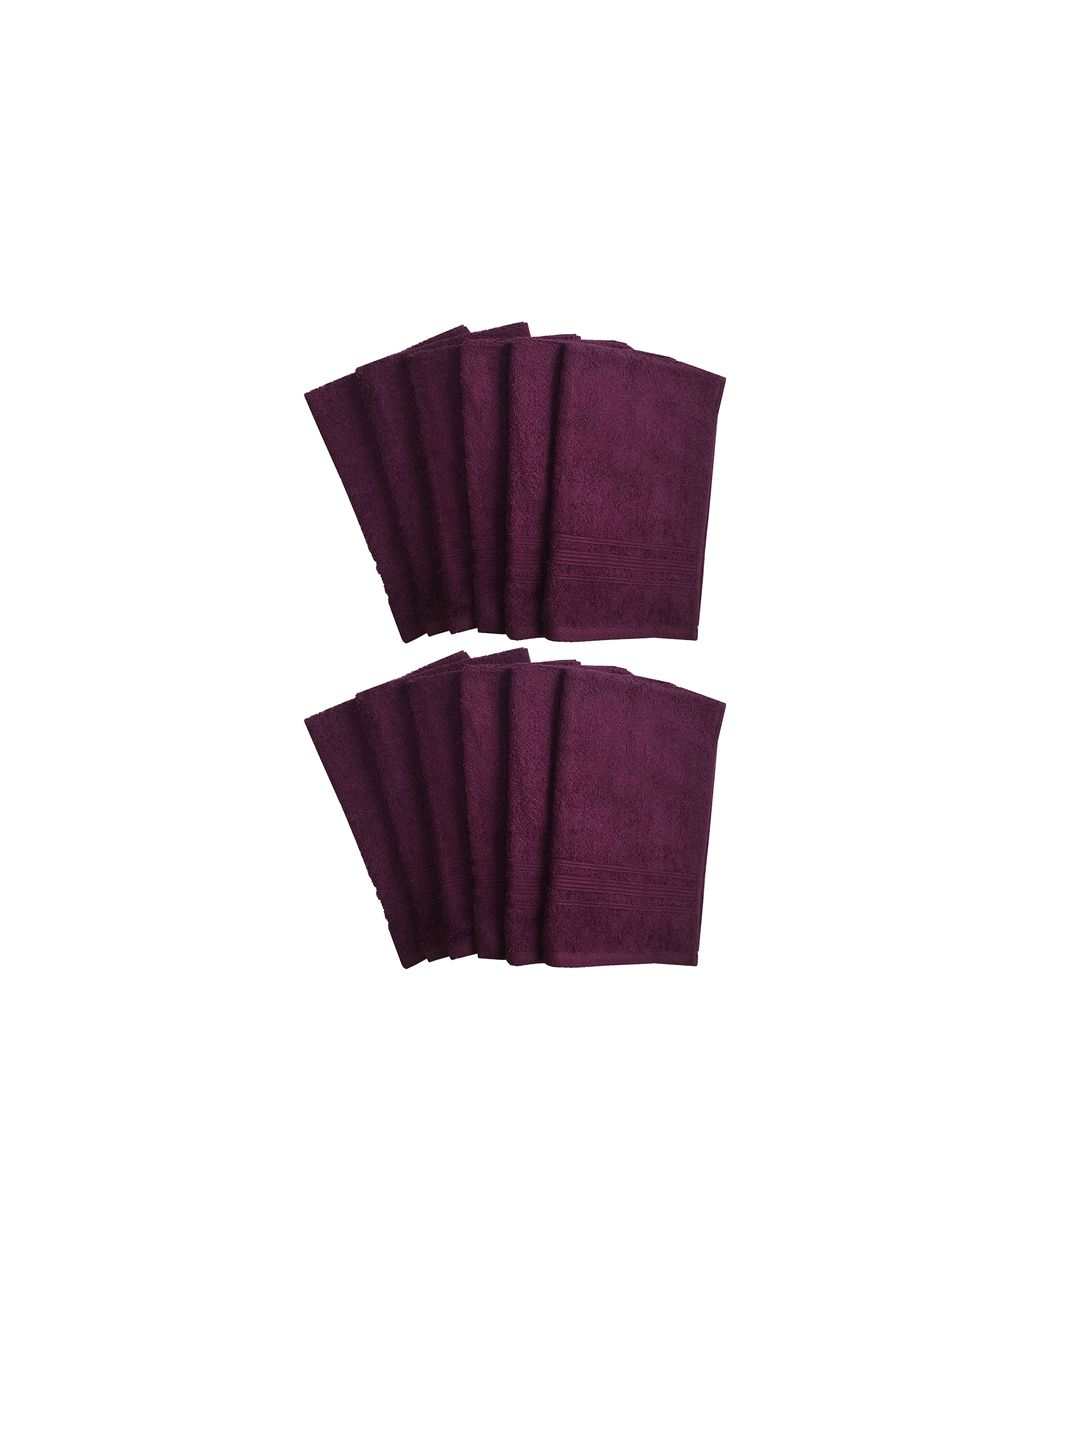 Lushomes Purple Pack of 12 Cotton 450GSM Hand Towels Price in India